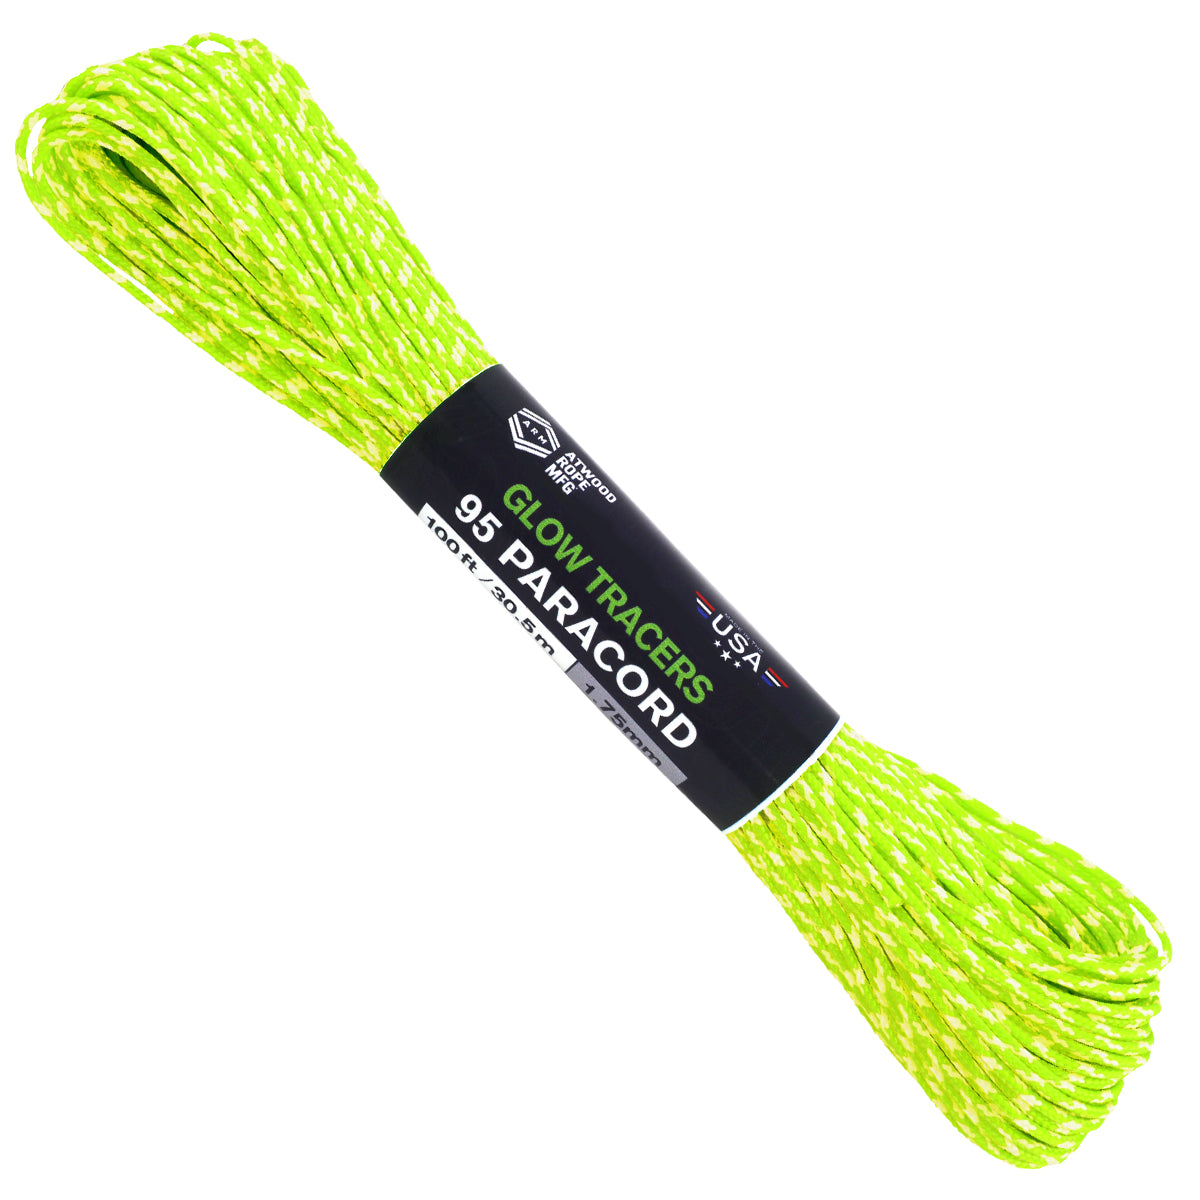 95 Paracord - Neon Green w/ Glow Tracer